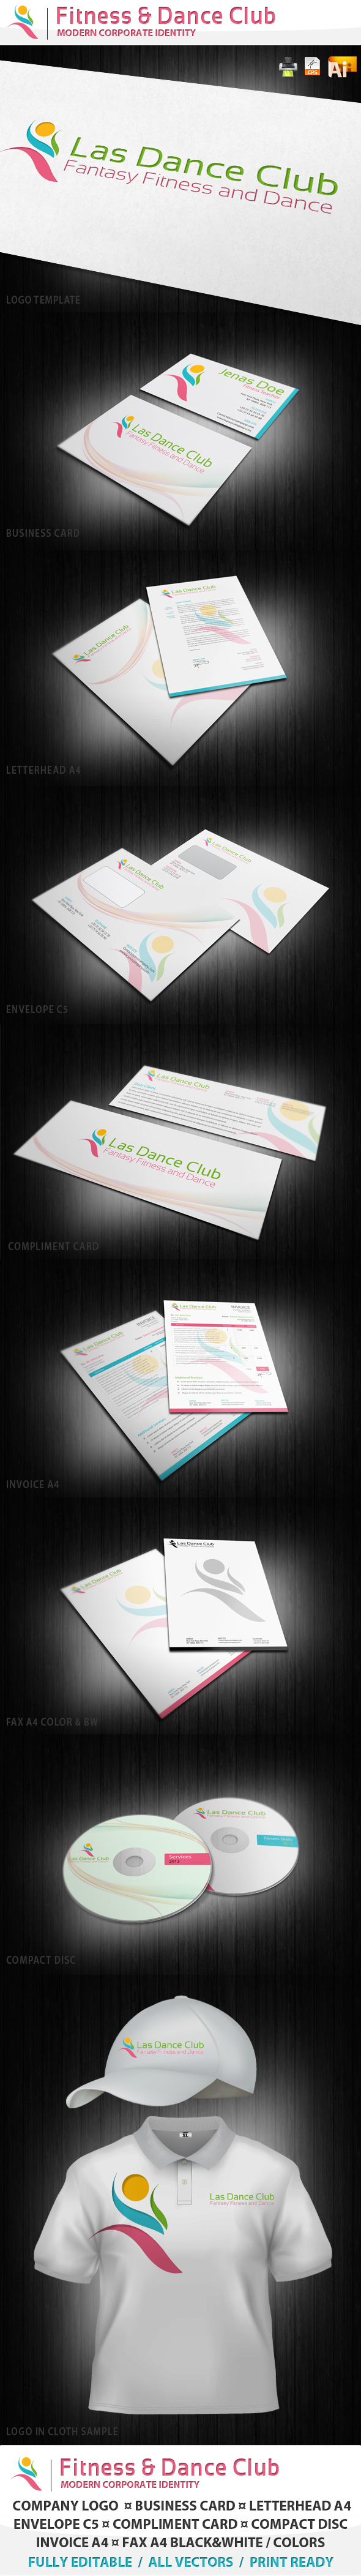 Aerobics body business card center club corporate exercises fitness gym identity Instructor modern professional sport Stationery template weight Wellness workout